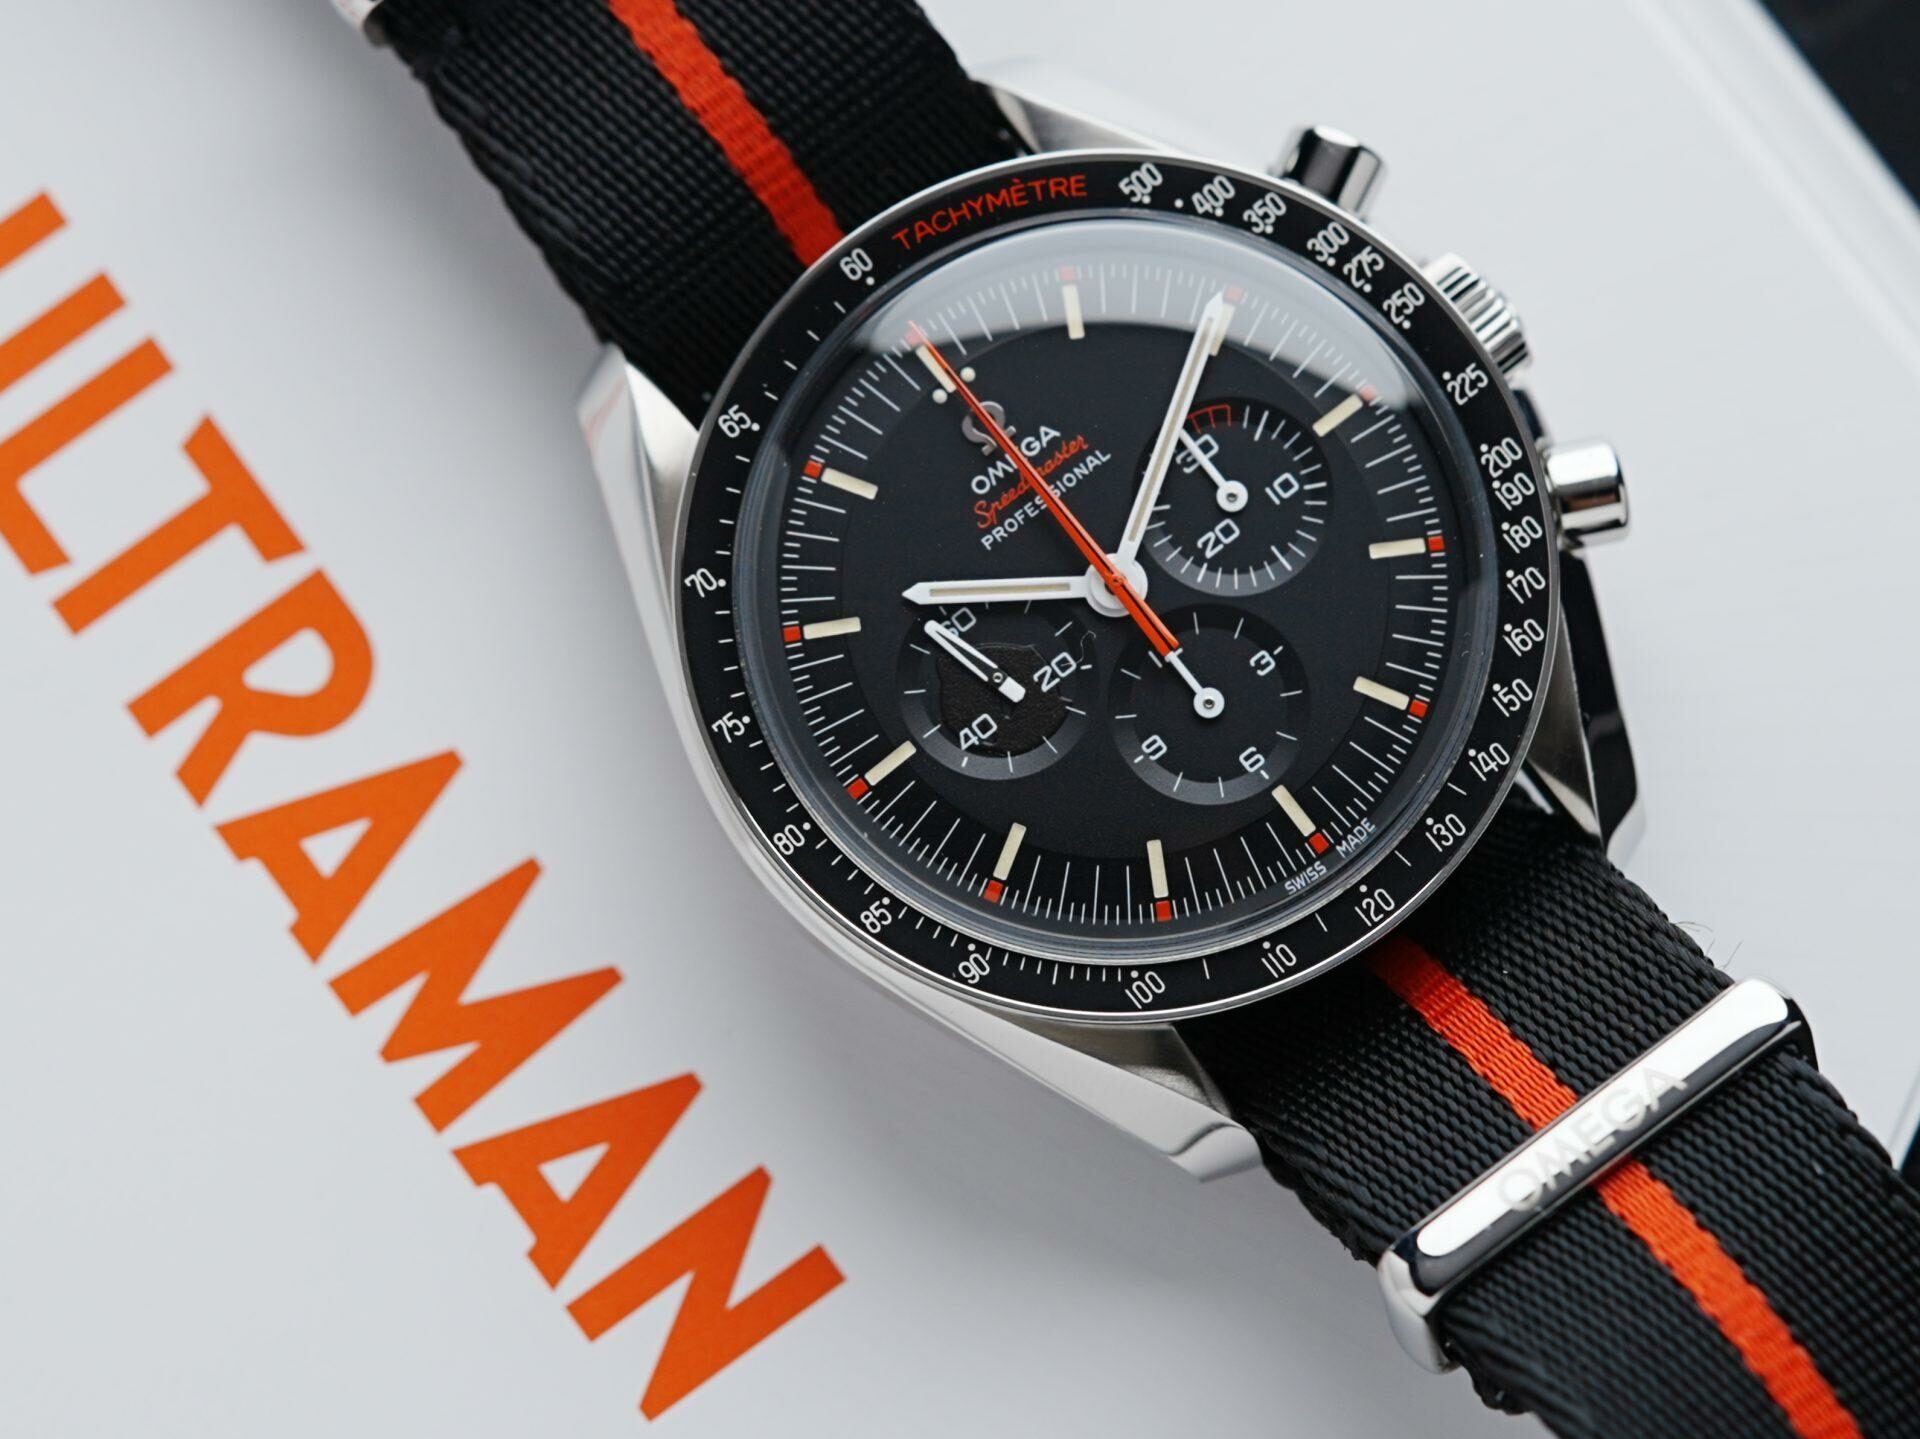 Omega Speedy Tuesday Ultraman watch featured on white background with orange text reading 